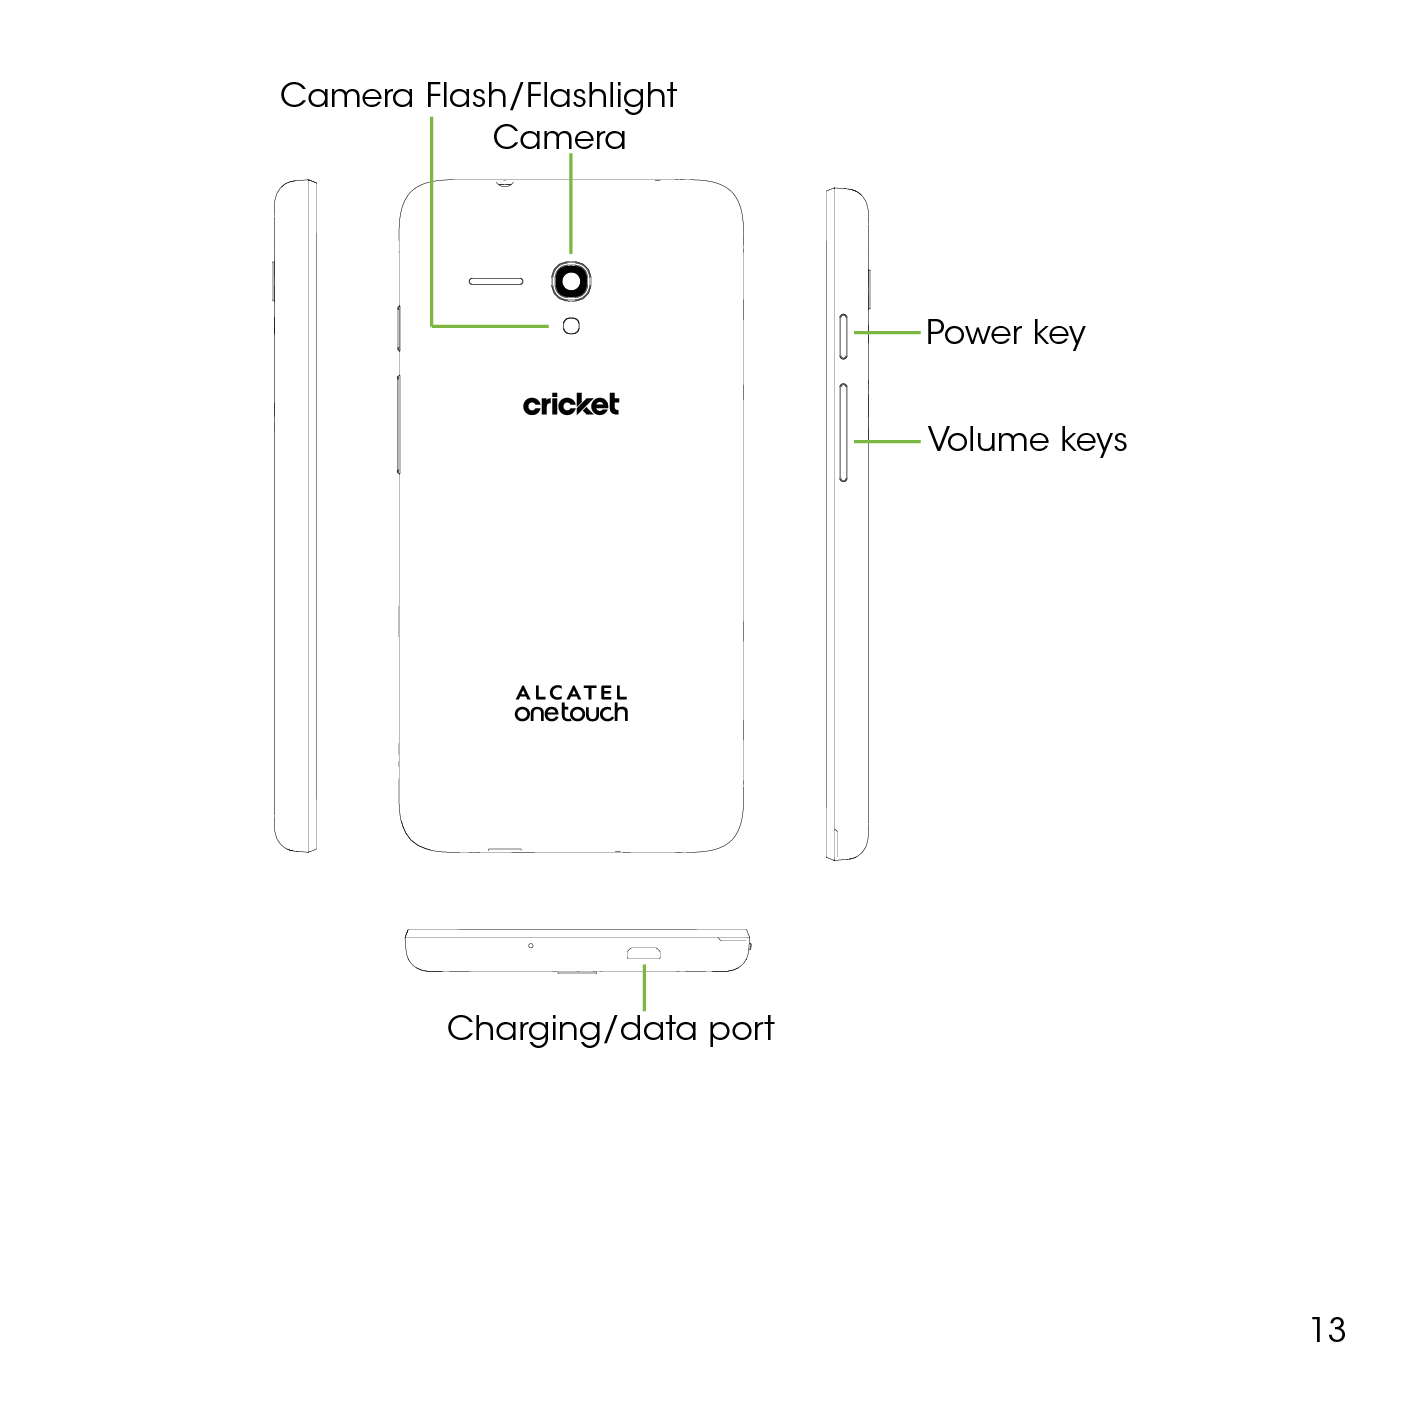 ALCATEL ONETOUCH FLINT User Manual, Page: 2